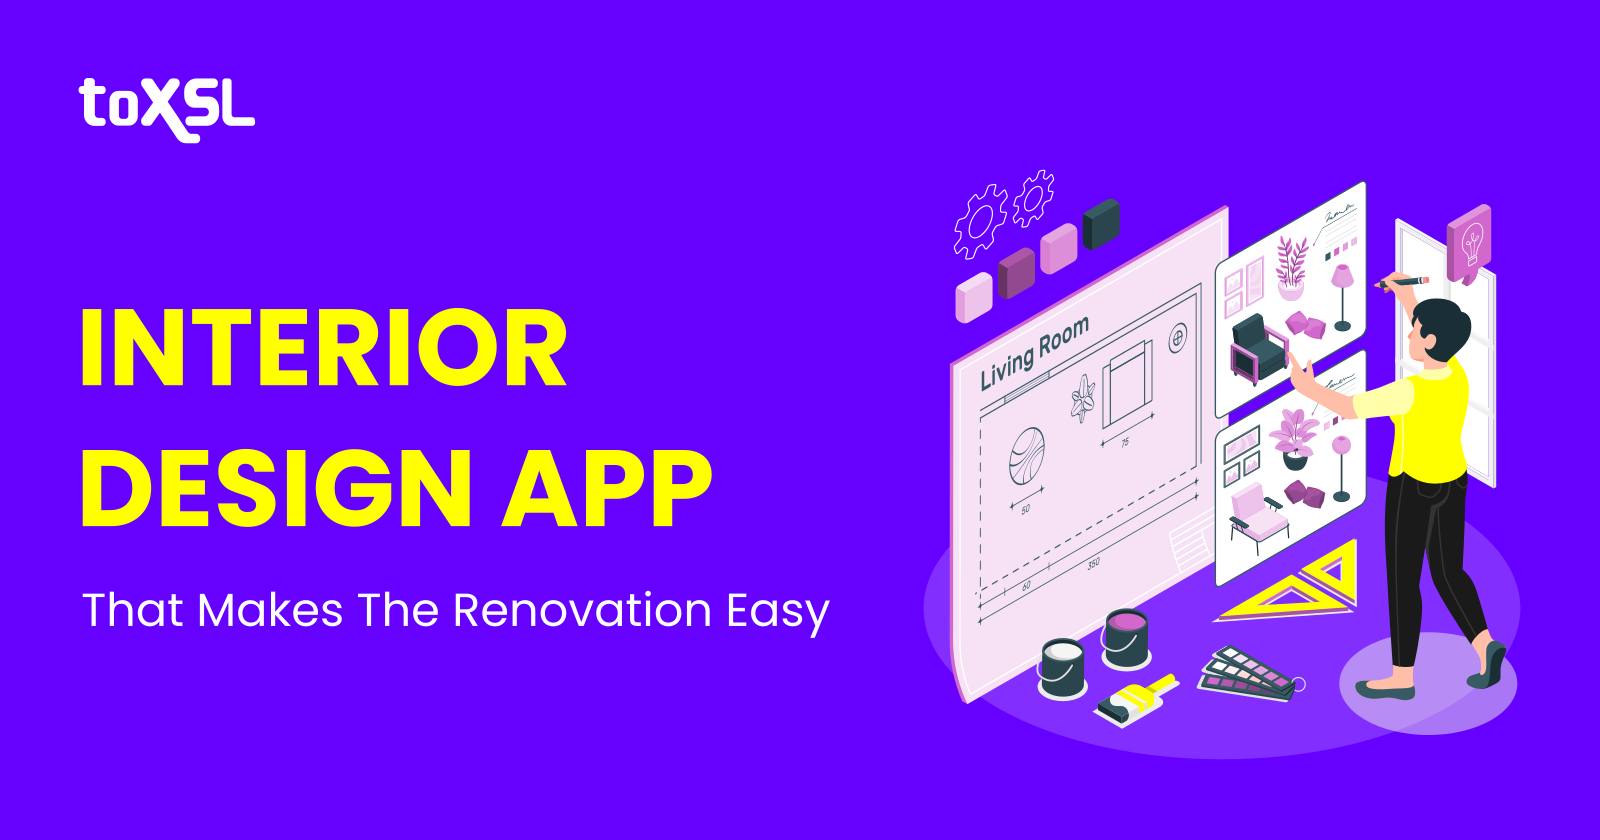 Interior Design Apps That Makes The Renovation Easy For You